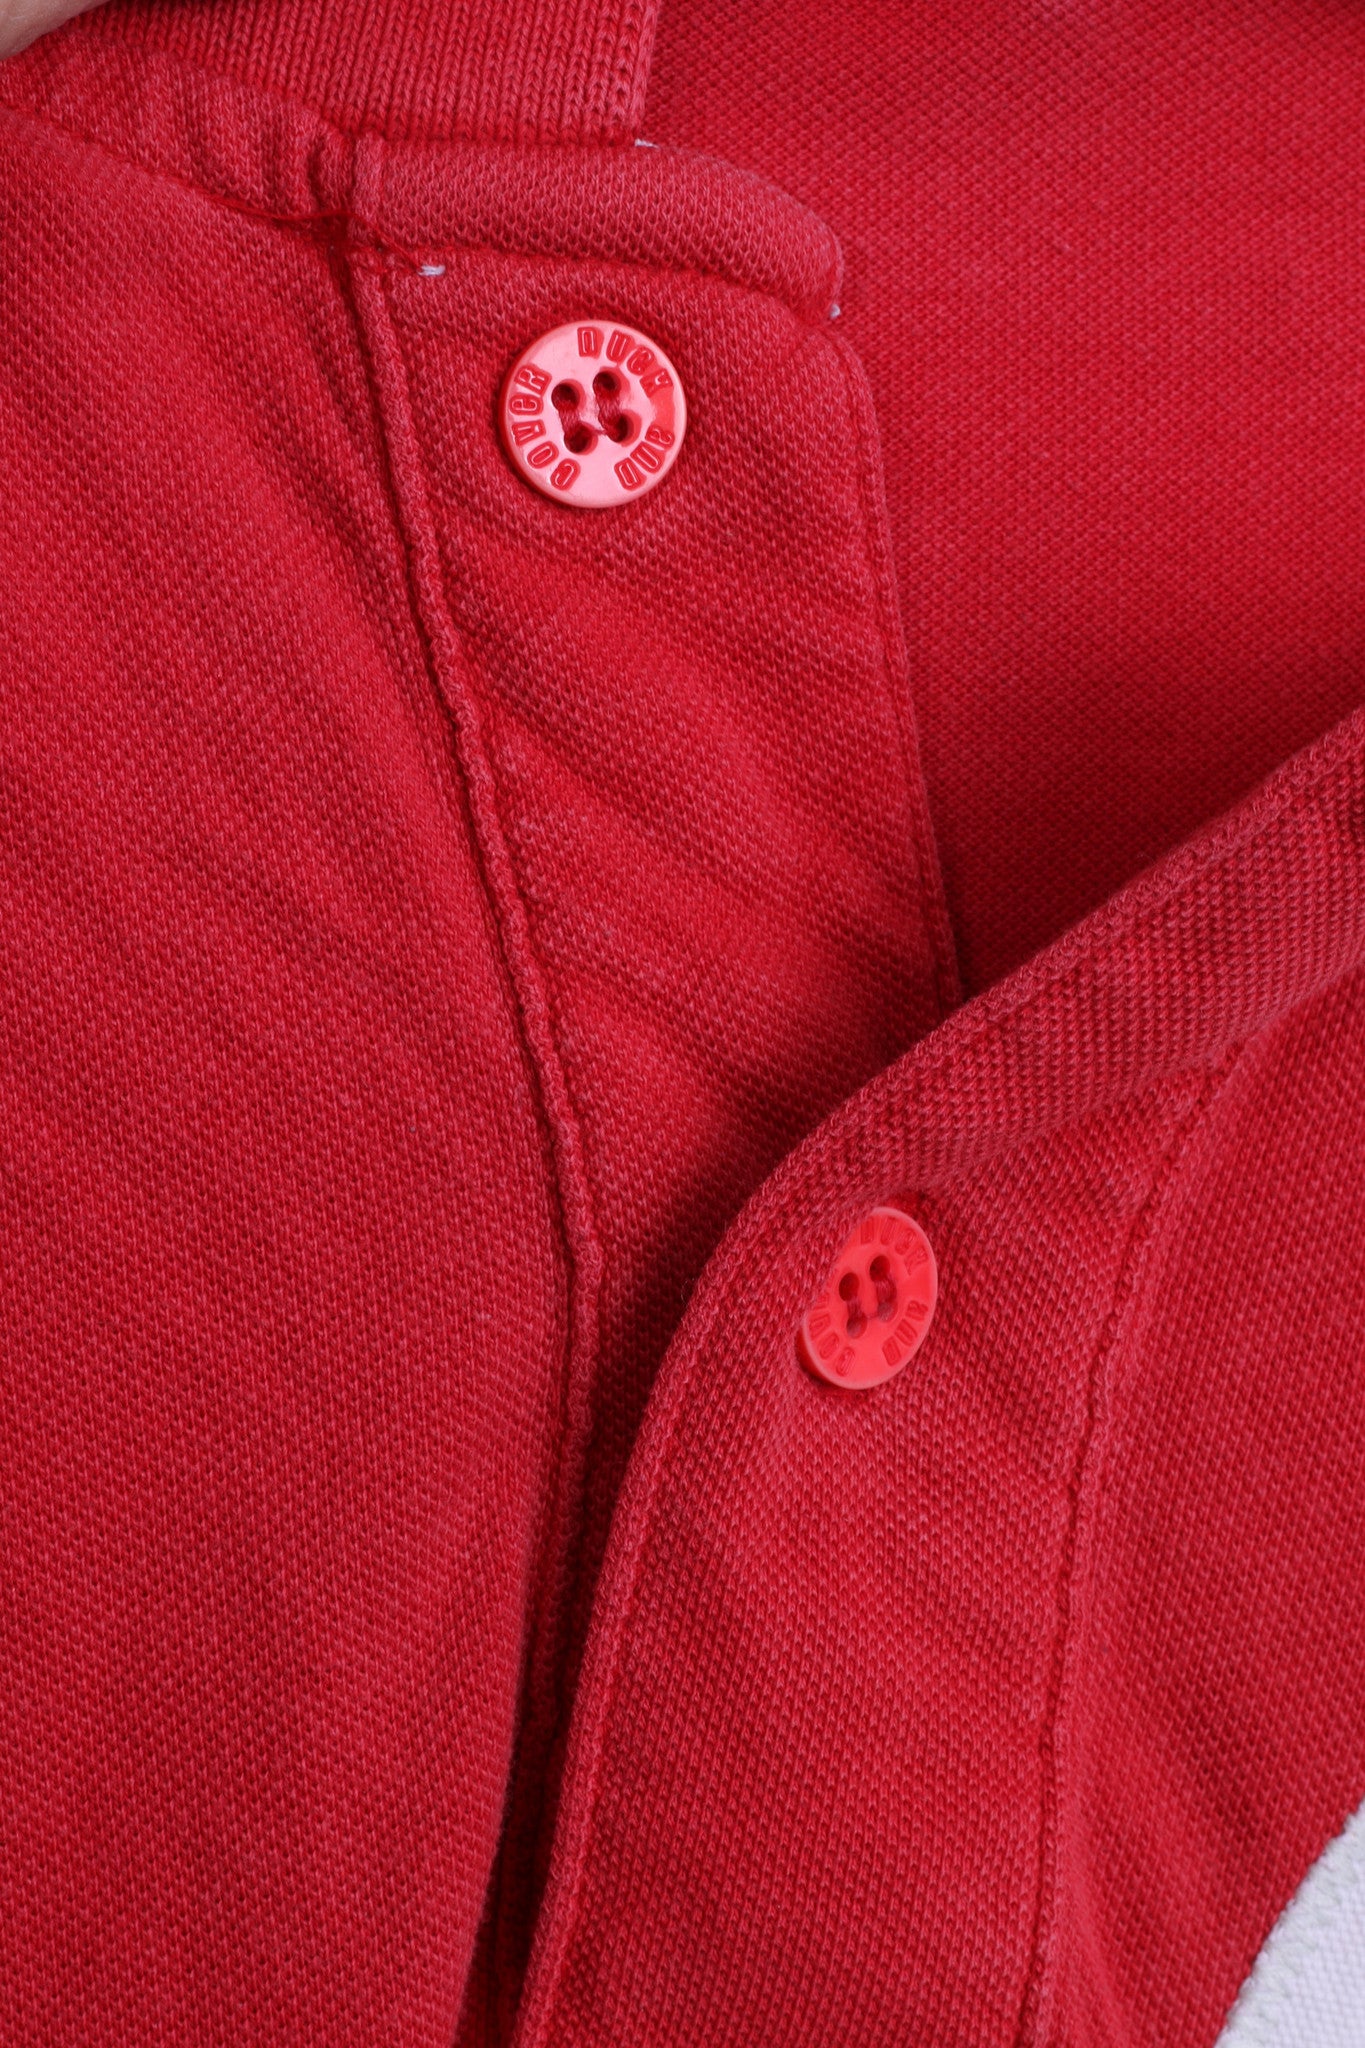 Duck and Cover Mens XL Polo Shirt Red Washed Look Cotton Top Jersey - RetrospectClothes